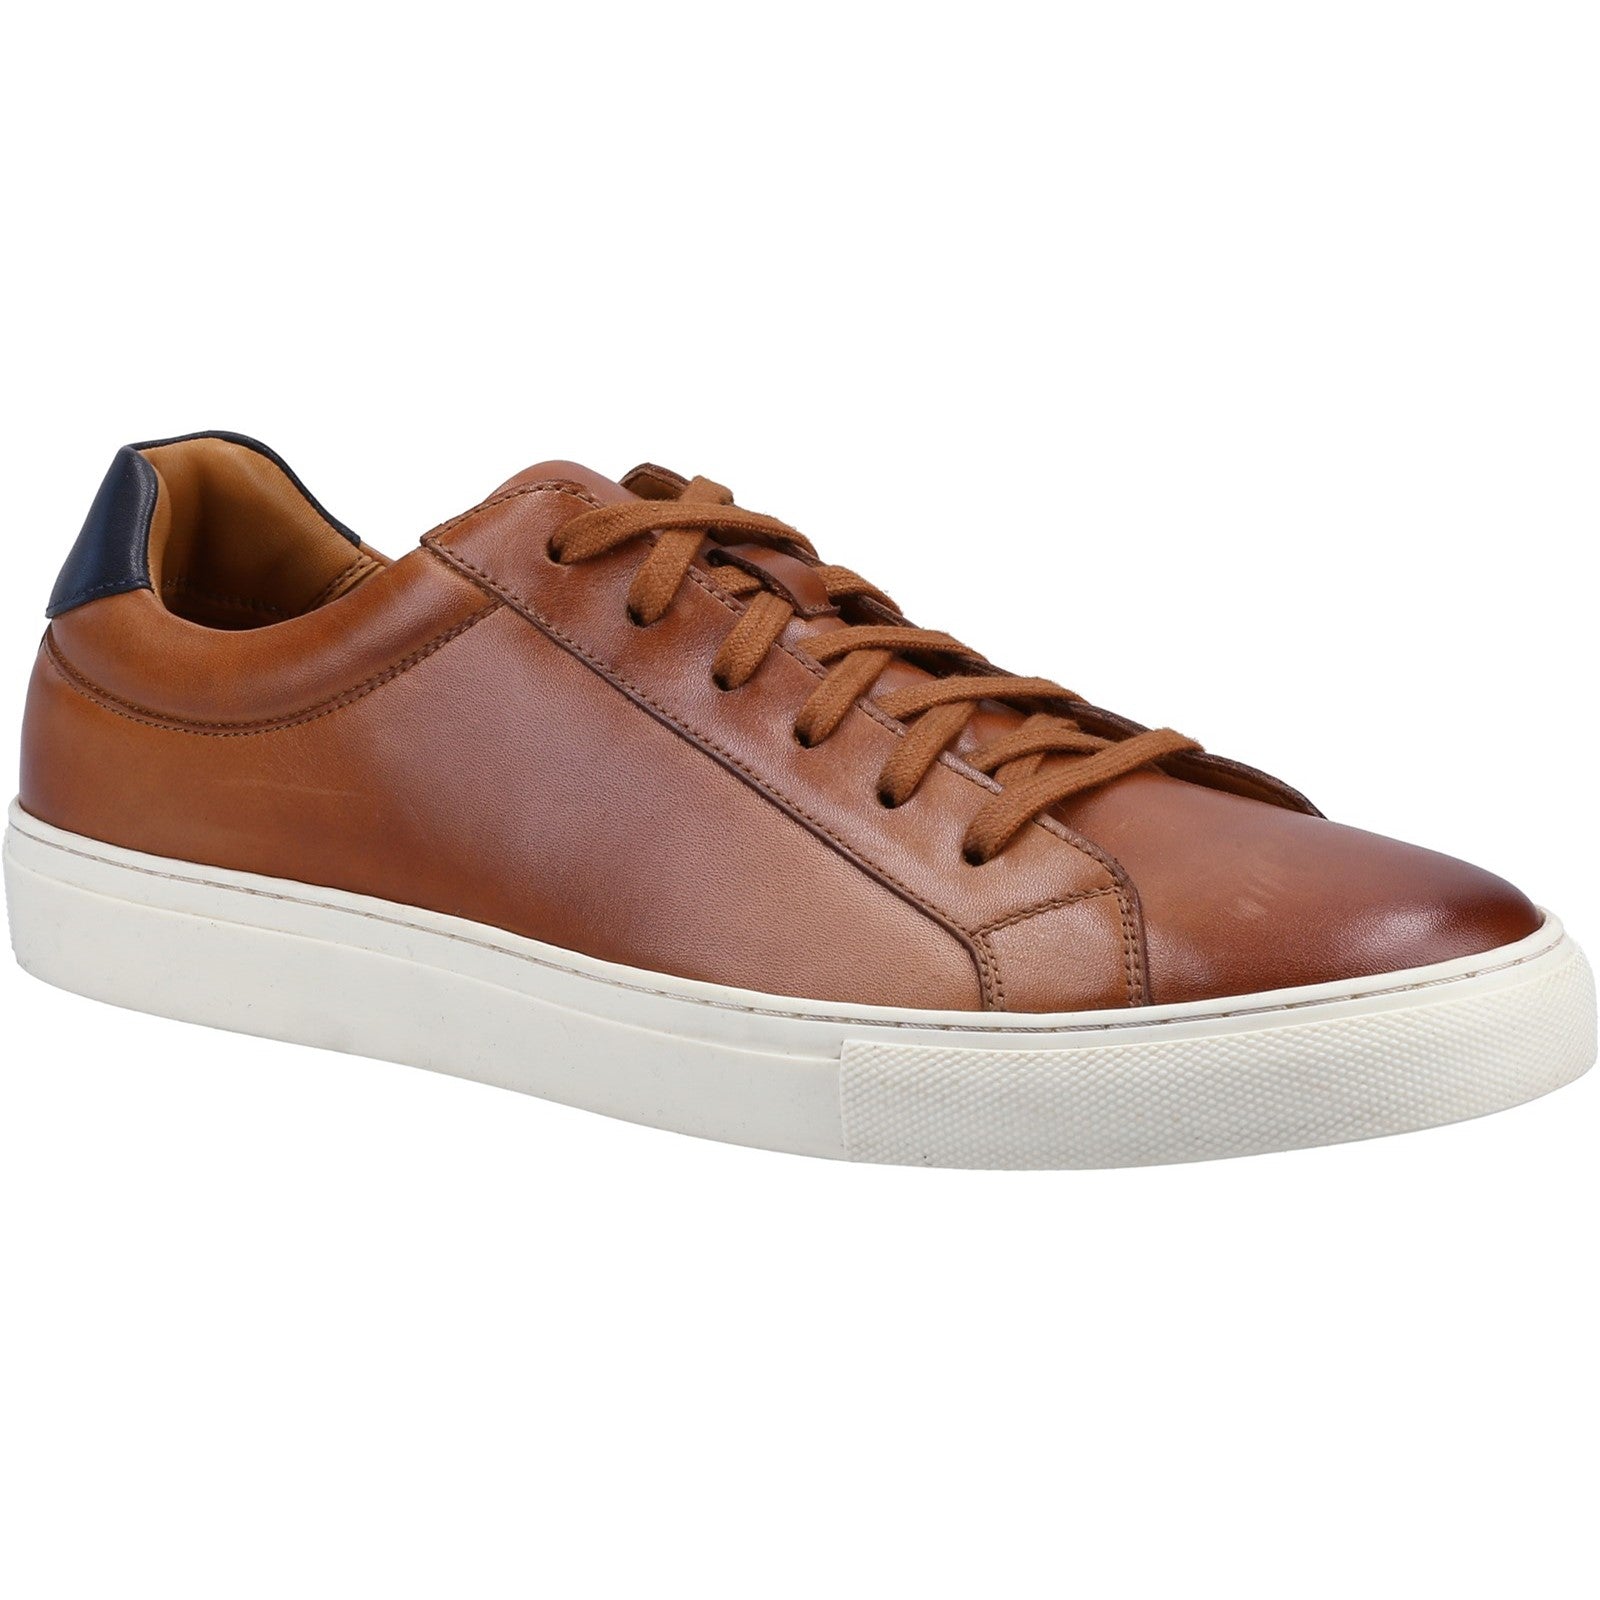 Hush Puppies Mens Colton Leather Trainers - Tan